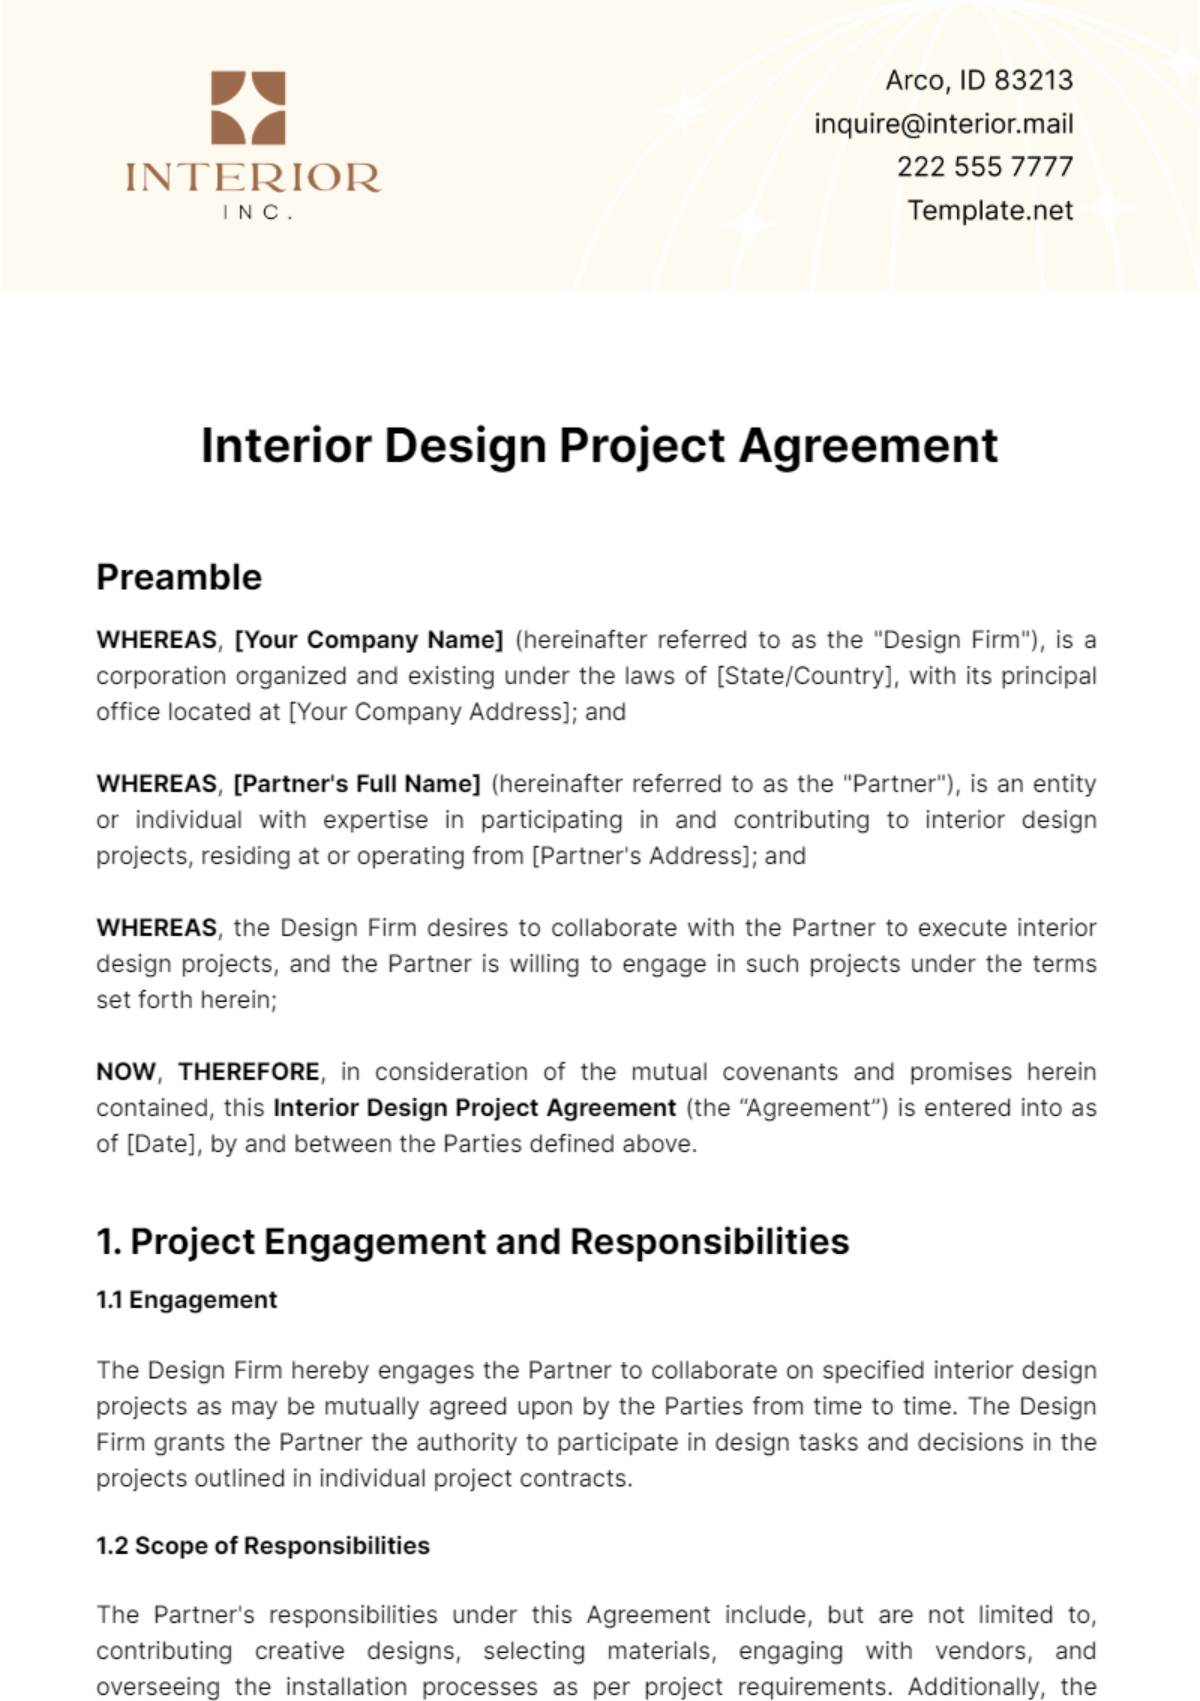 Interior Design Project Agreement Template